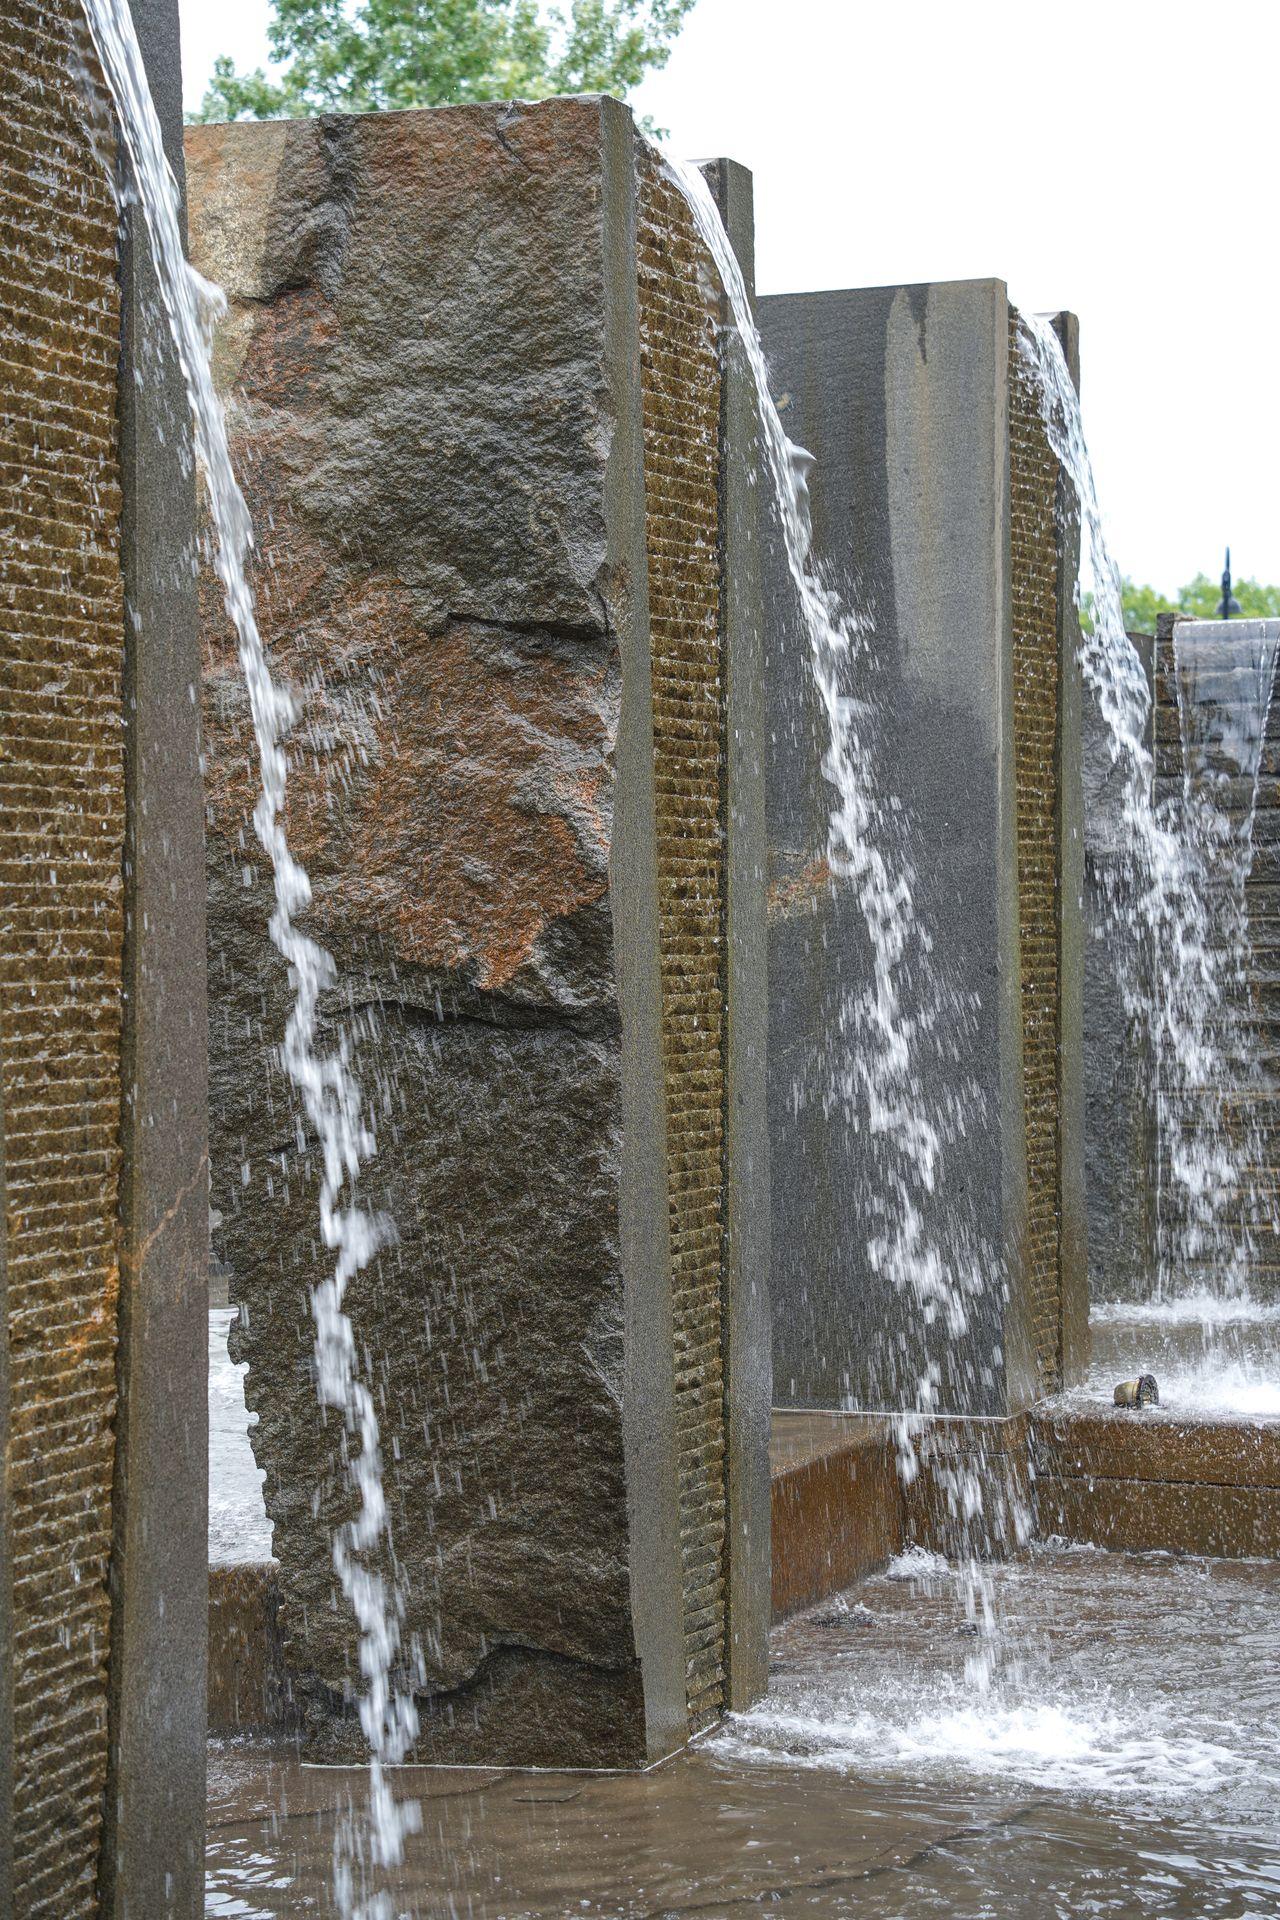 Water falling from a stone wall at the Granite Fountain along Lake George